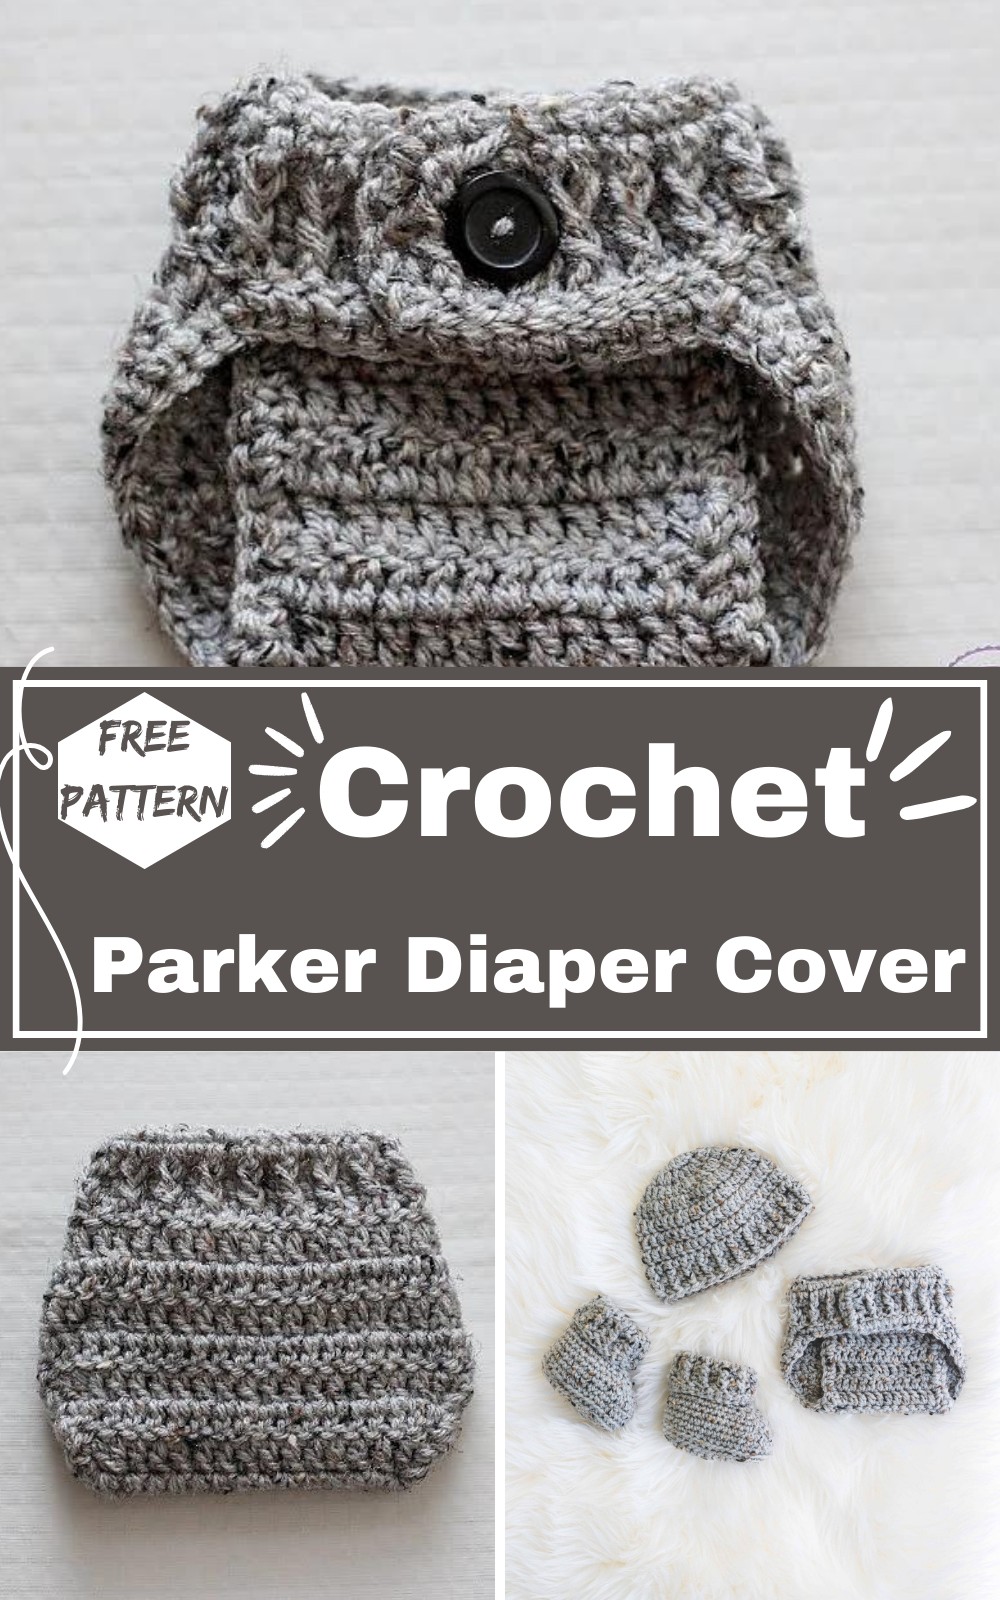 The Parker Diaper Cover